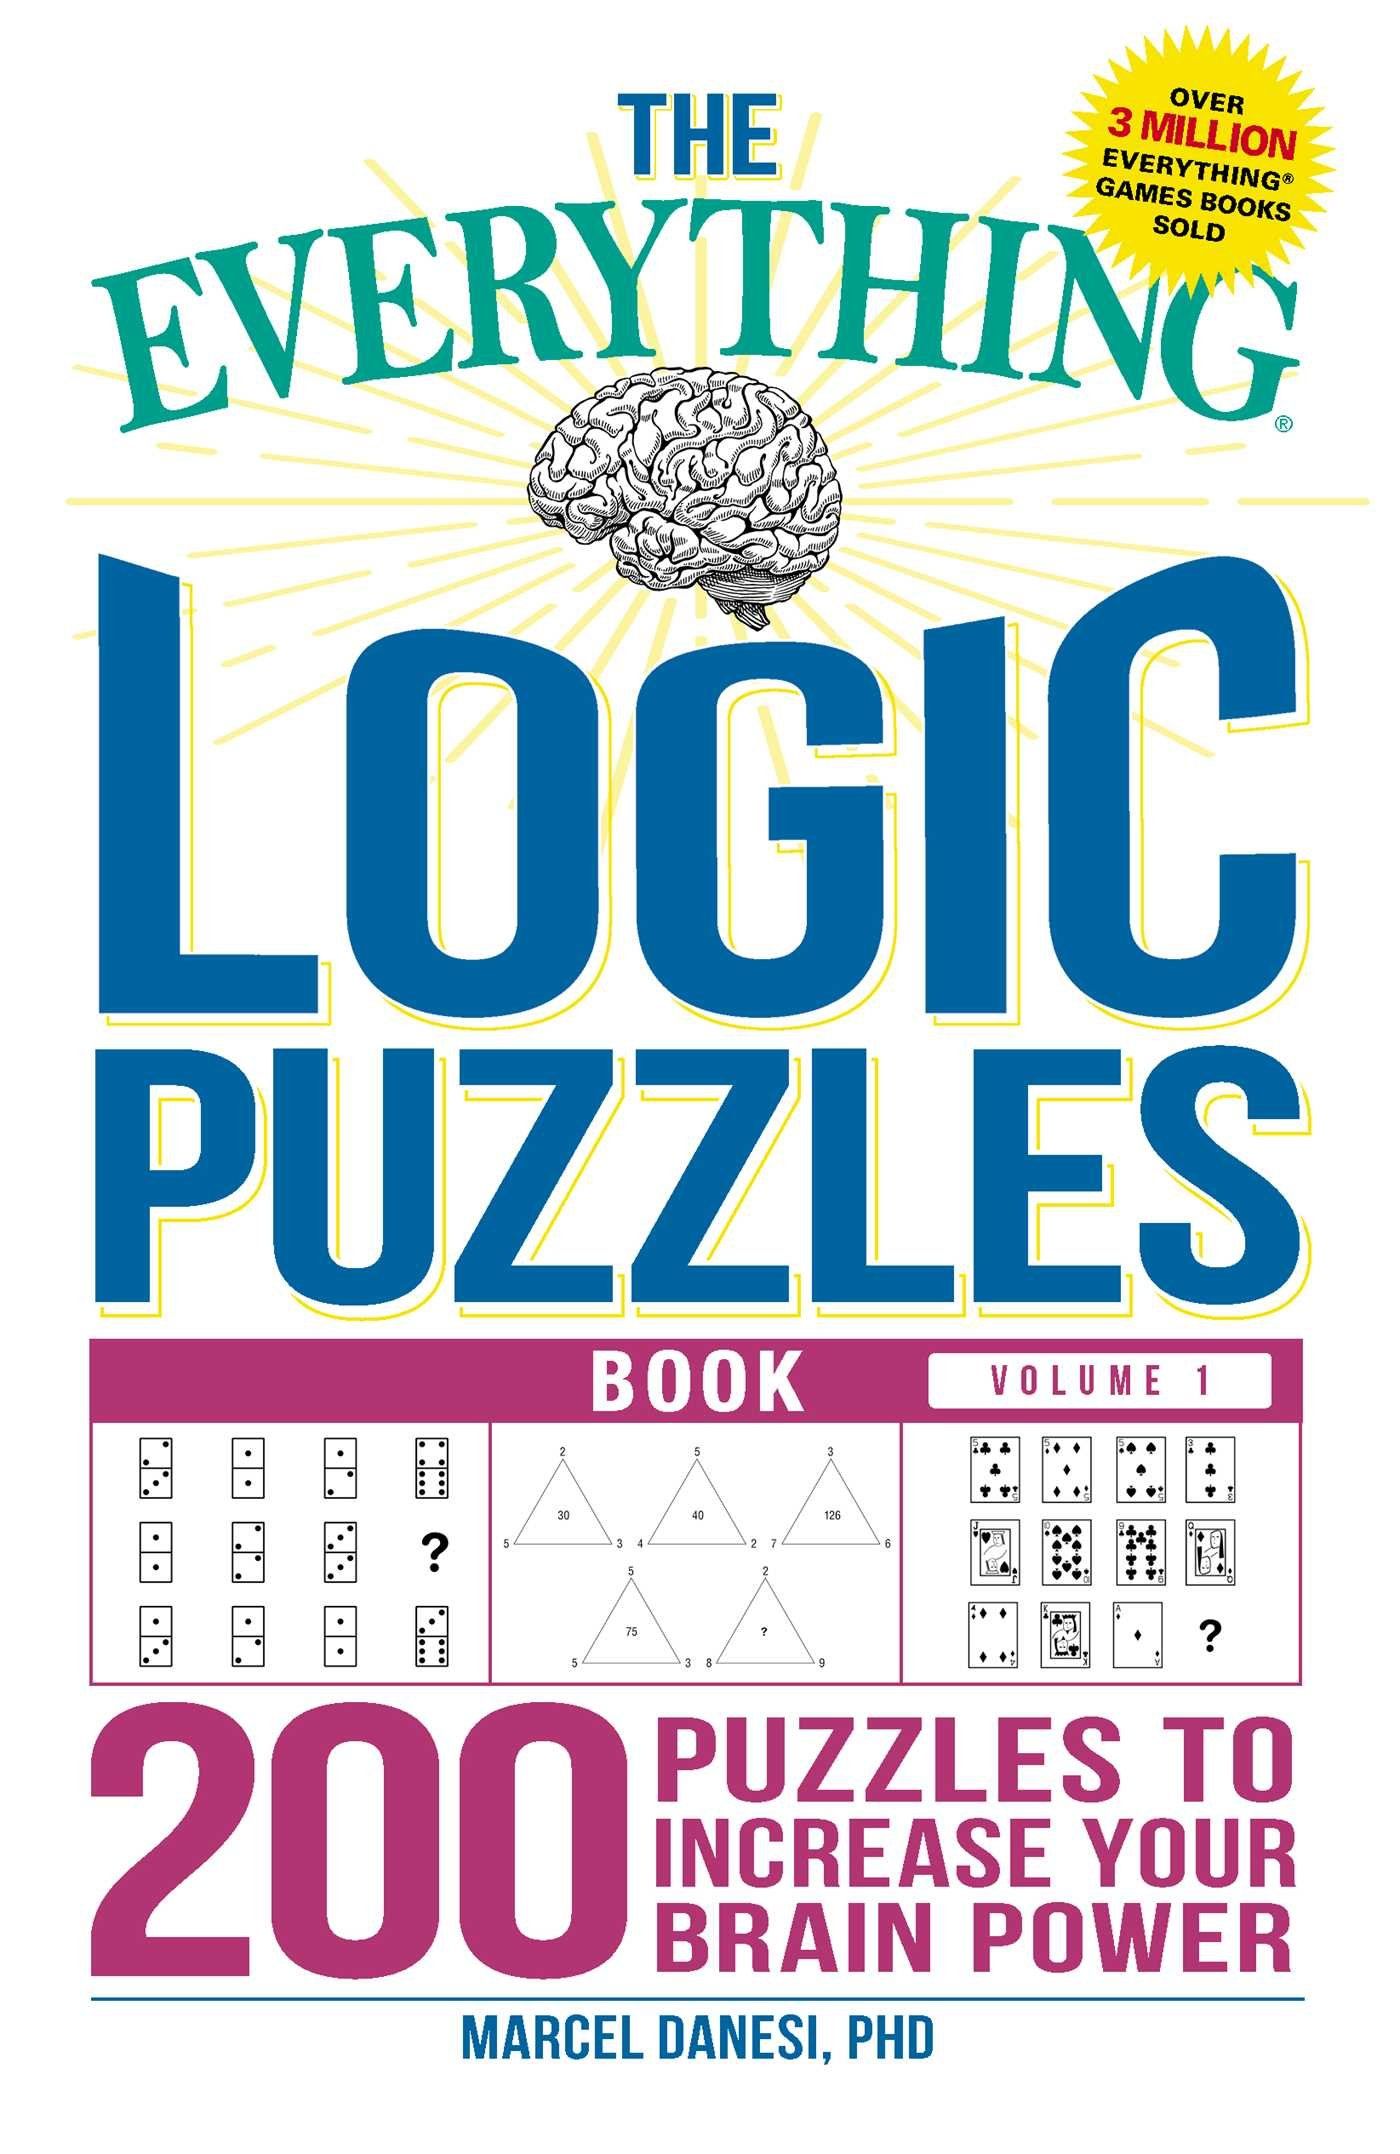 The Everything Logic Puzzles Book Volume 1 200 Puzzles to Increase Your Brain Power Paperback – July 11 2017